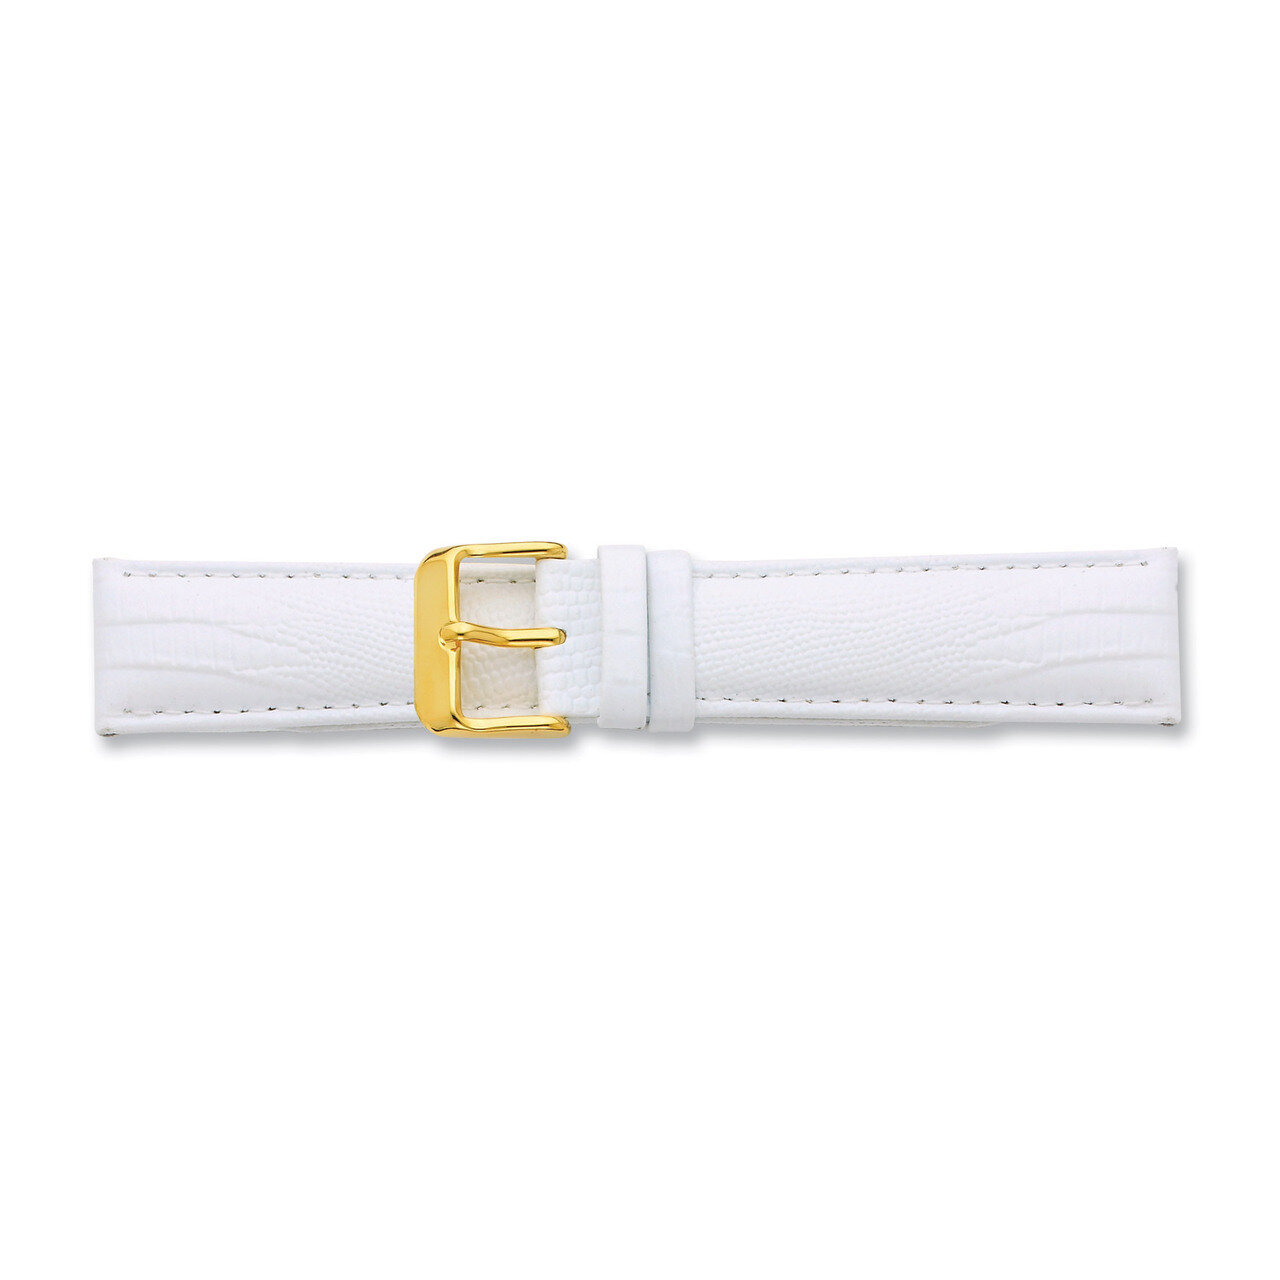 14mm White Teju Lizzard Grain Leather Buckle Watch Band 6.75 Inch Gold-tone BA203-14